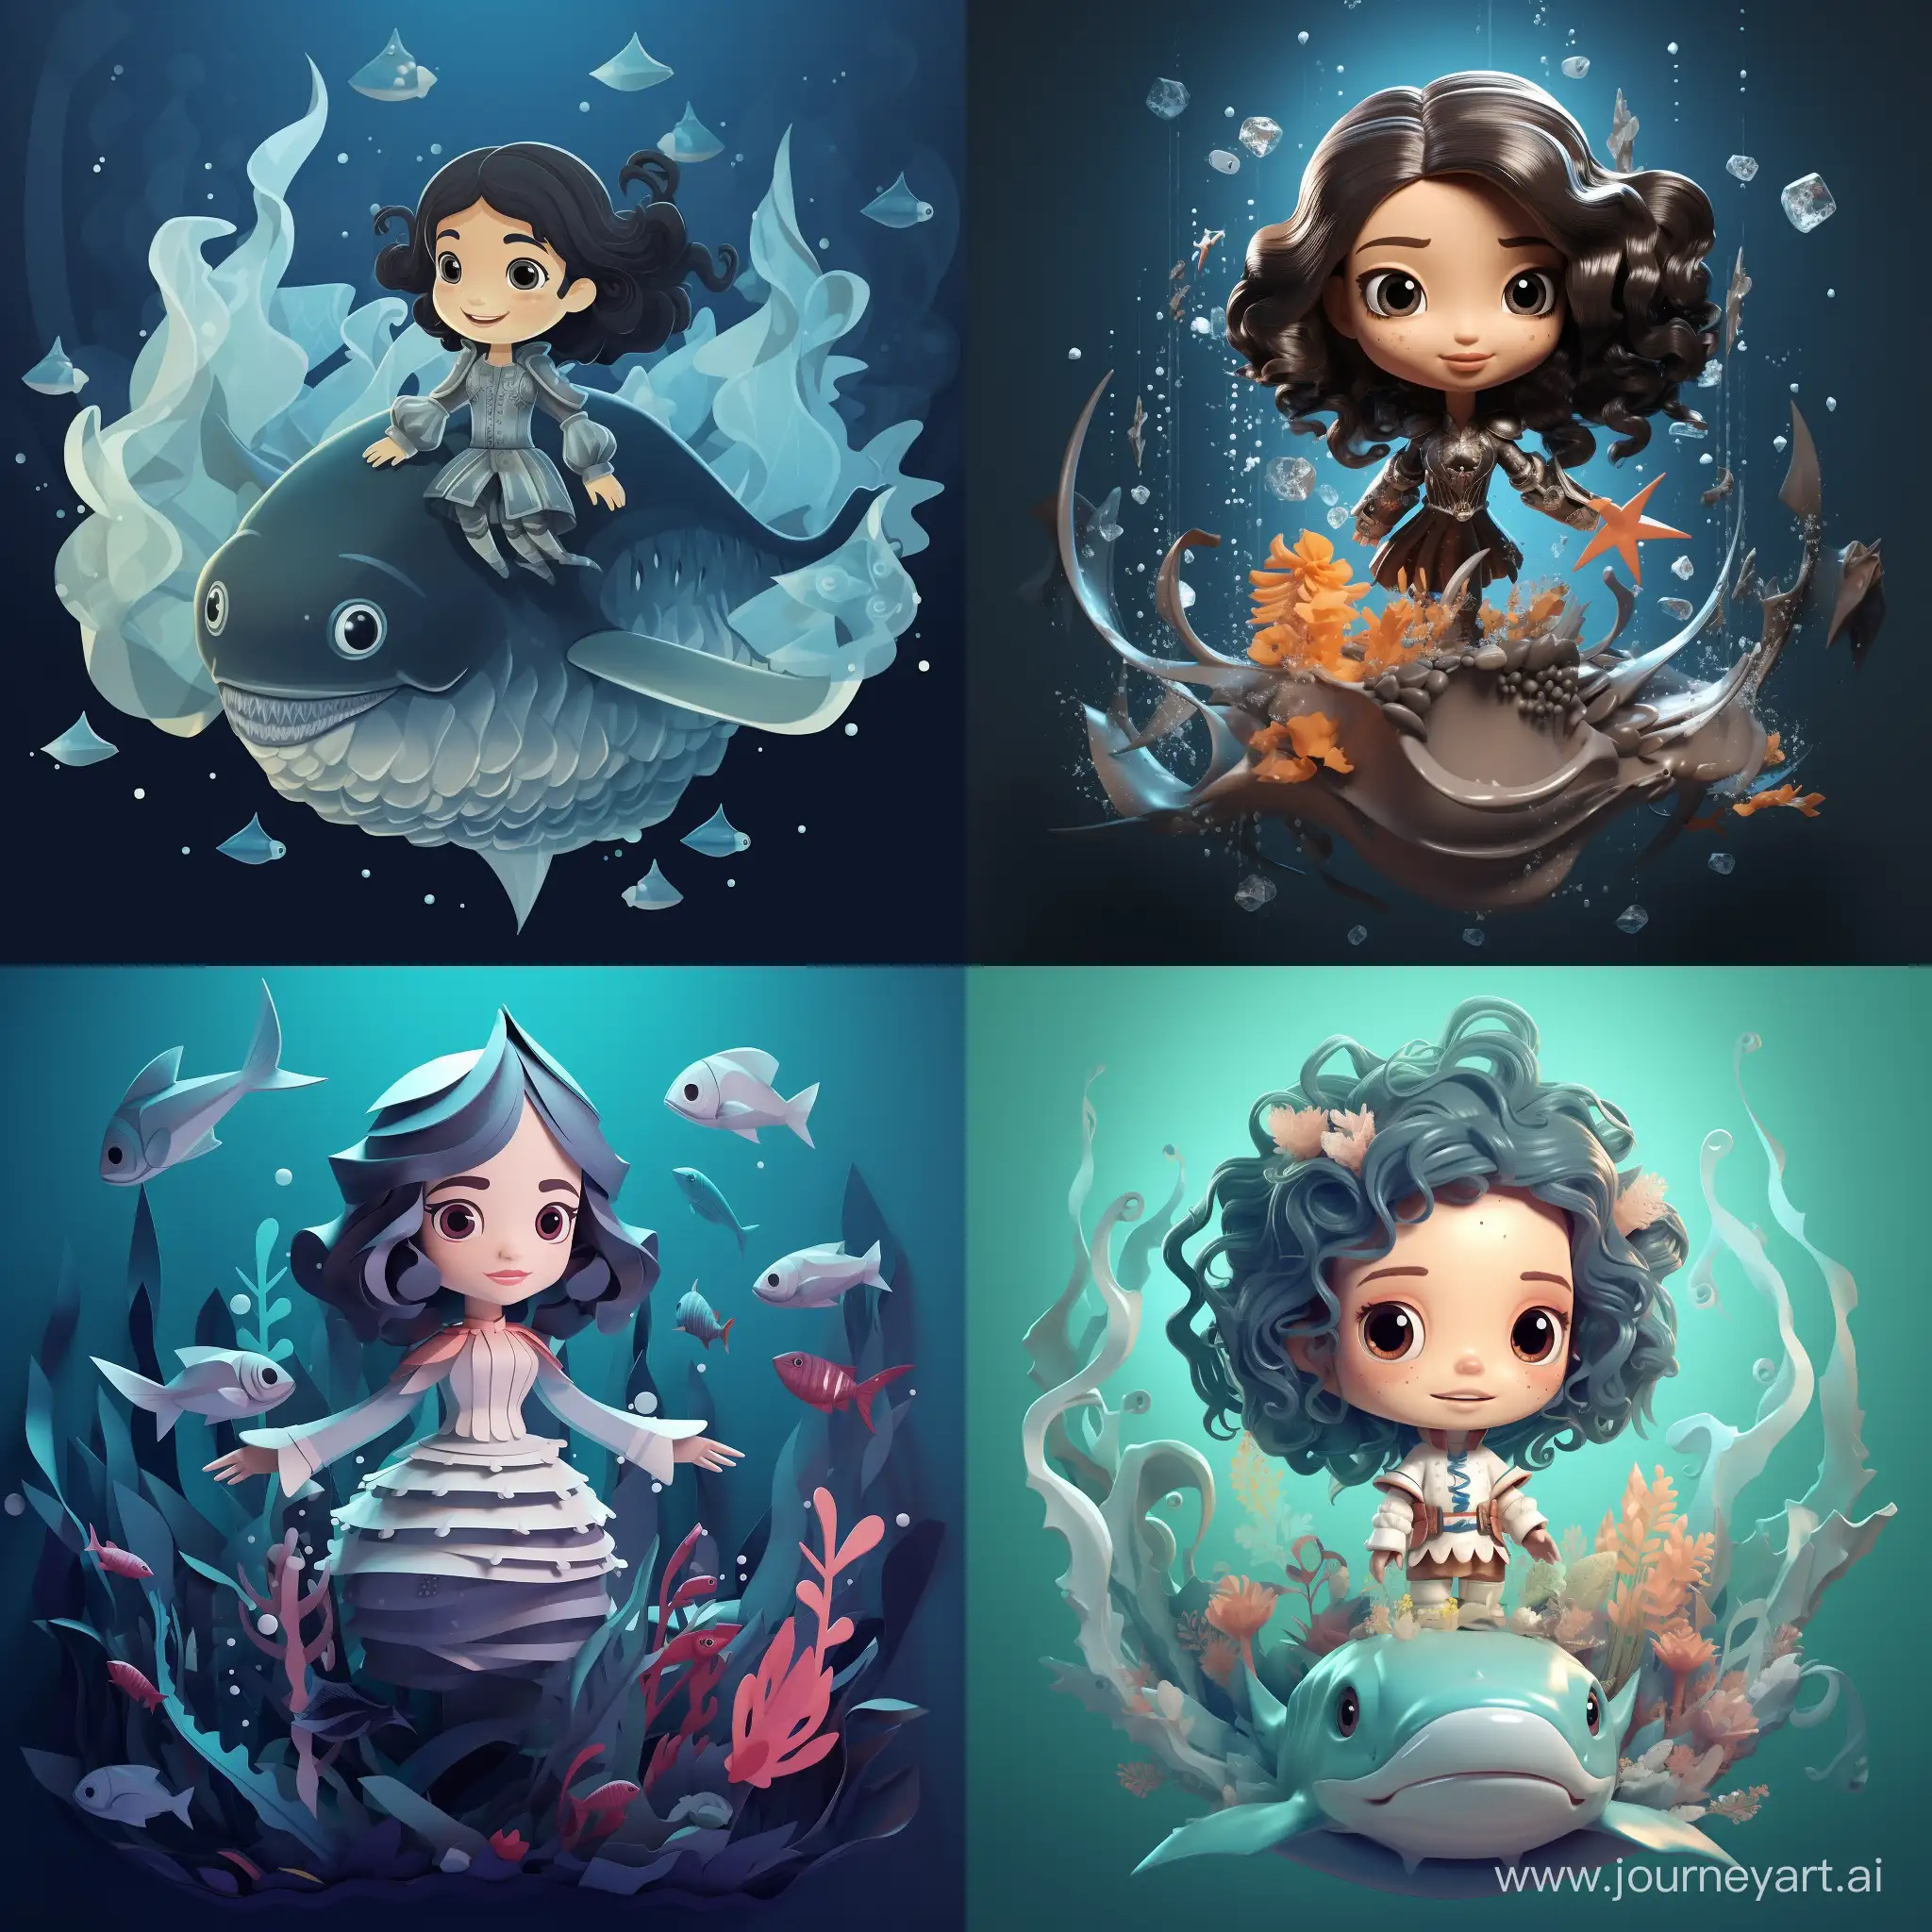 Whimsical-Witch-Doll-and-Friendly-Shark-Adventure-in-a-2D-Ocean-Vector